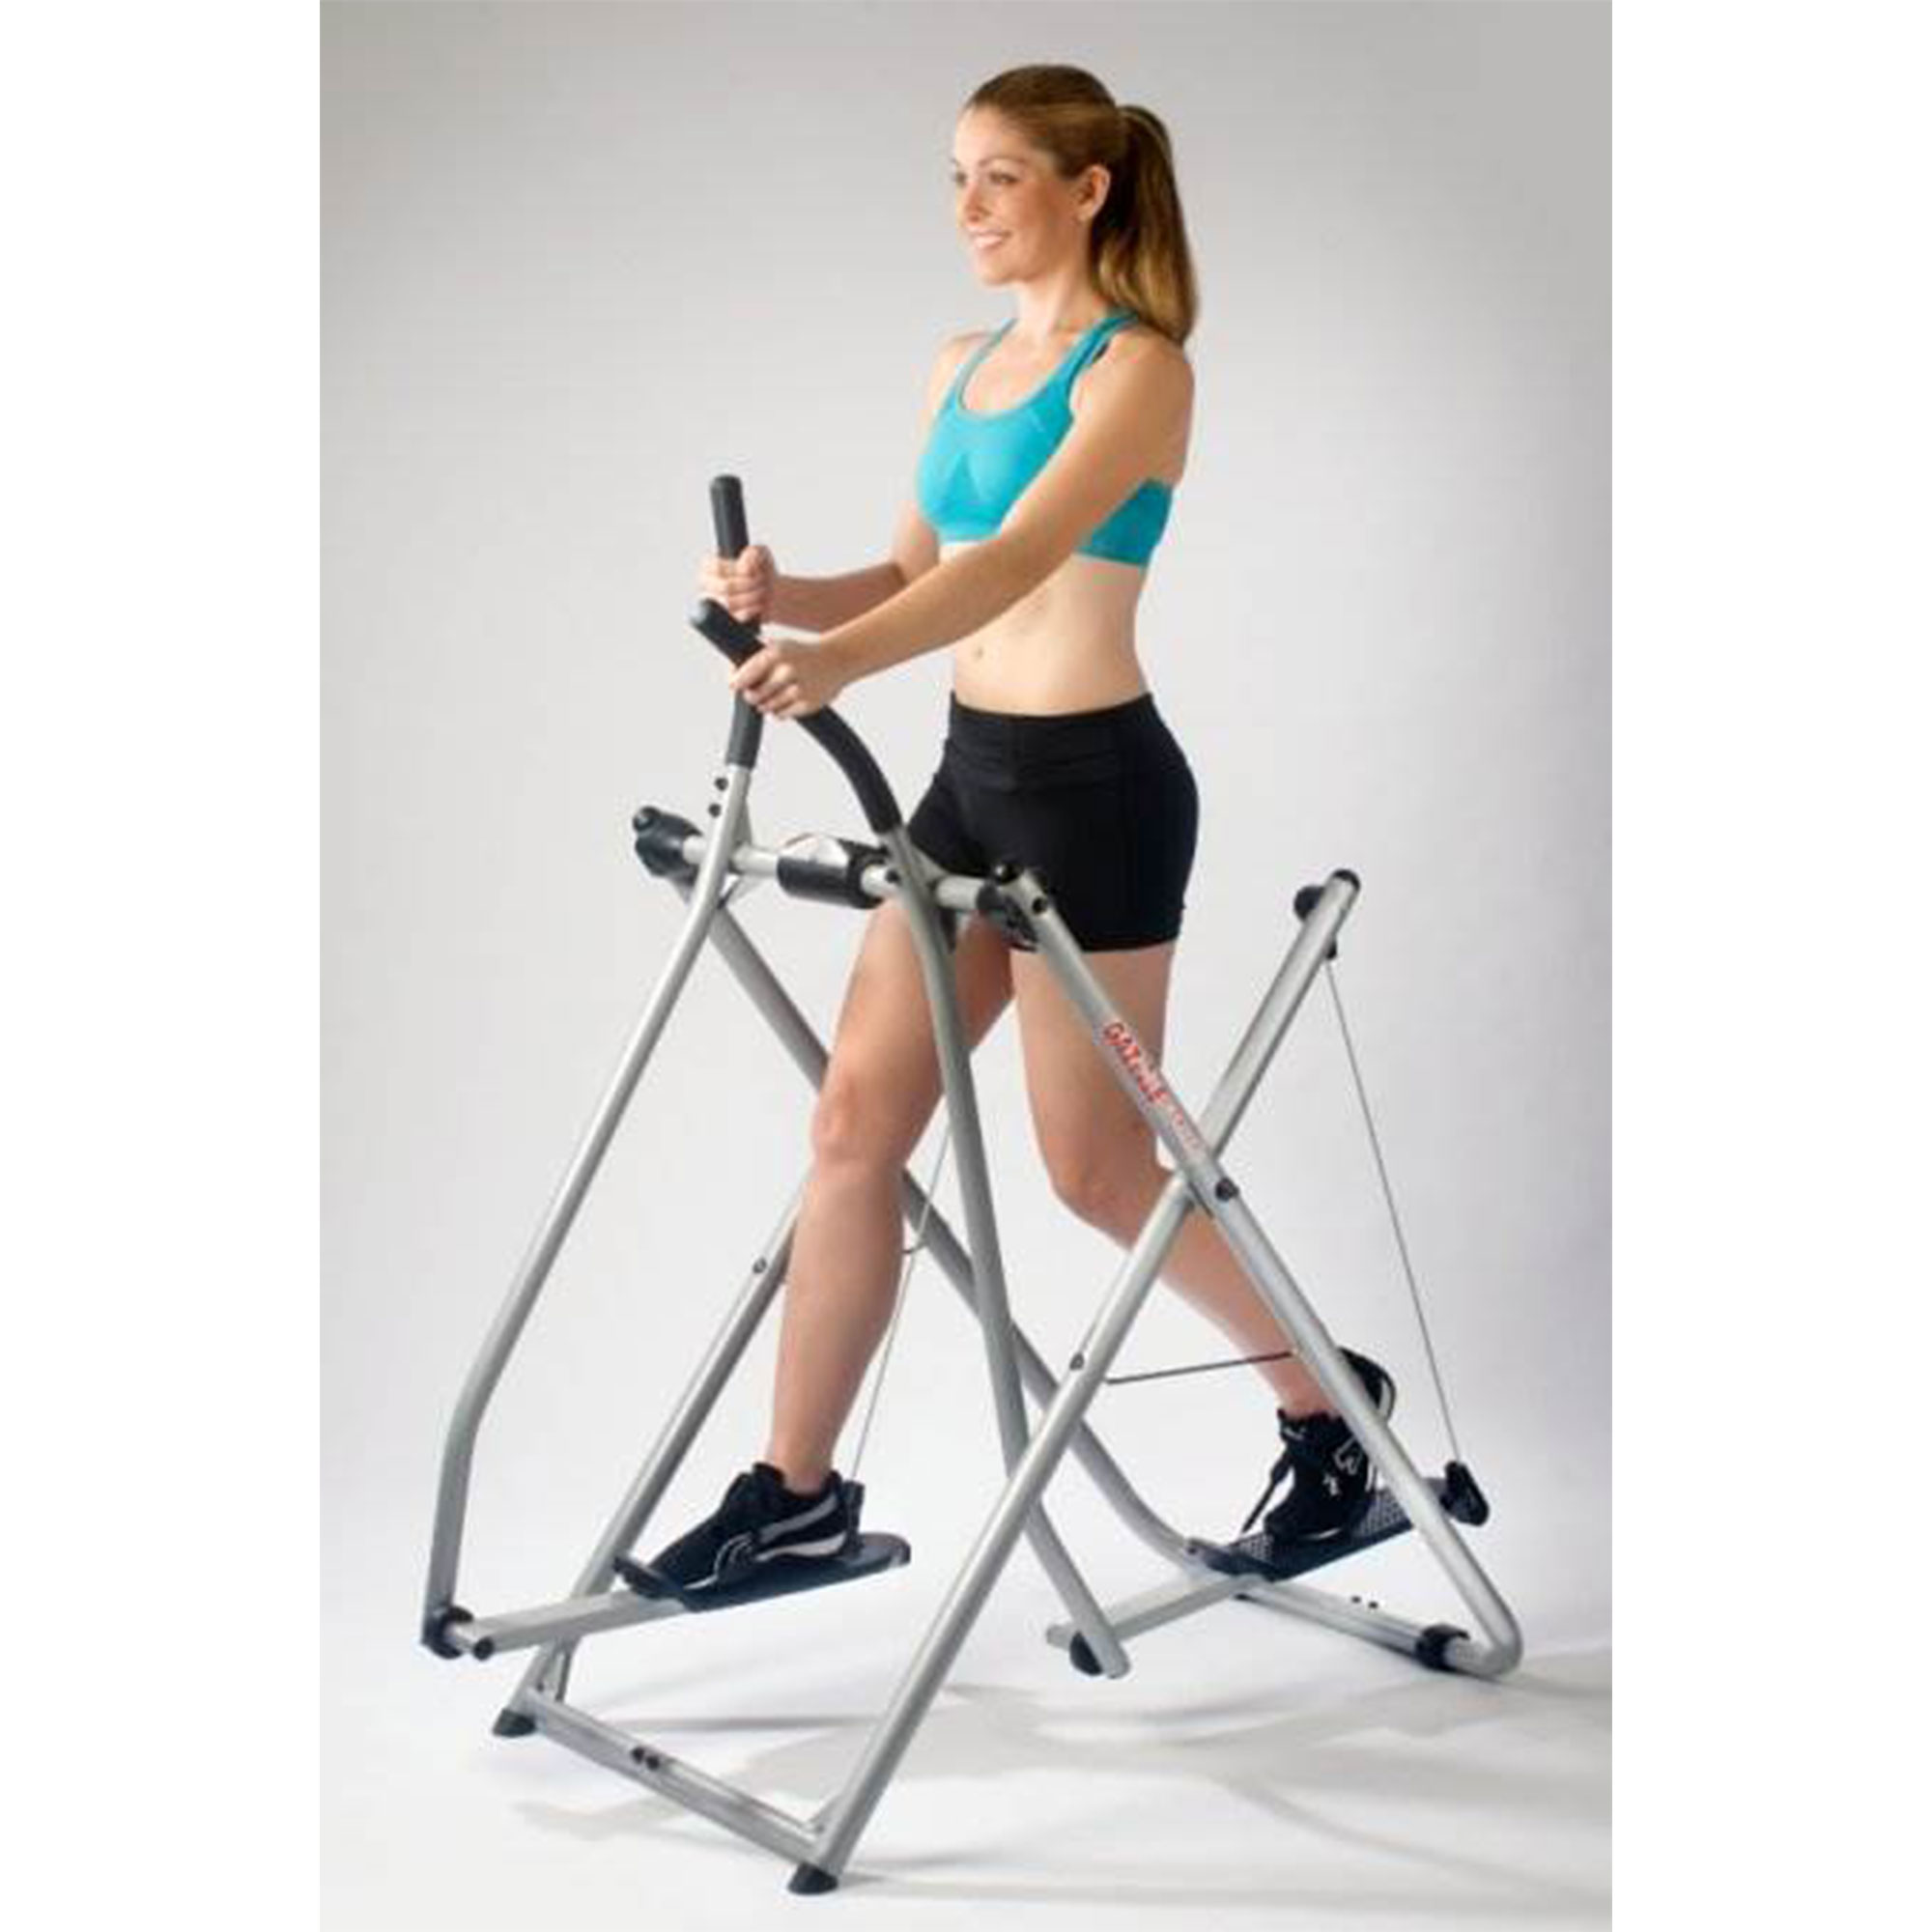 Gazelle Edge Glider Home Fitness Exercise Equipment Machine w/ Workout DVD - image 9 of 12